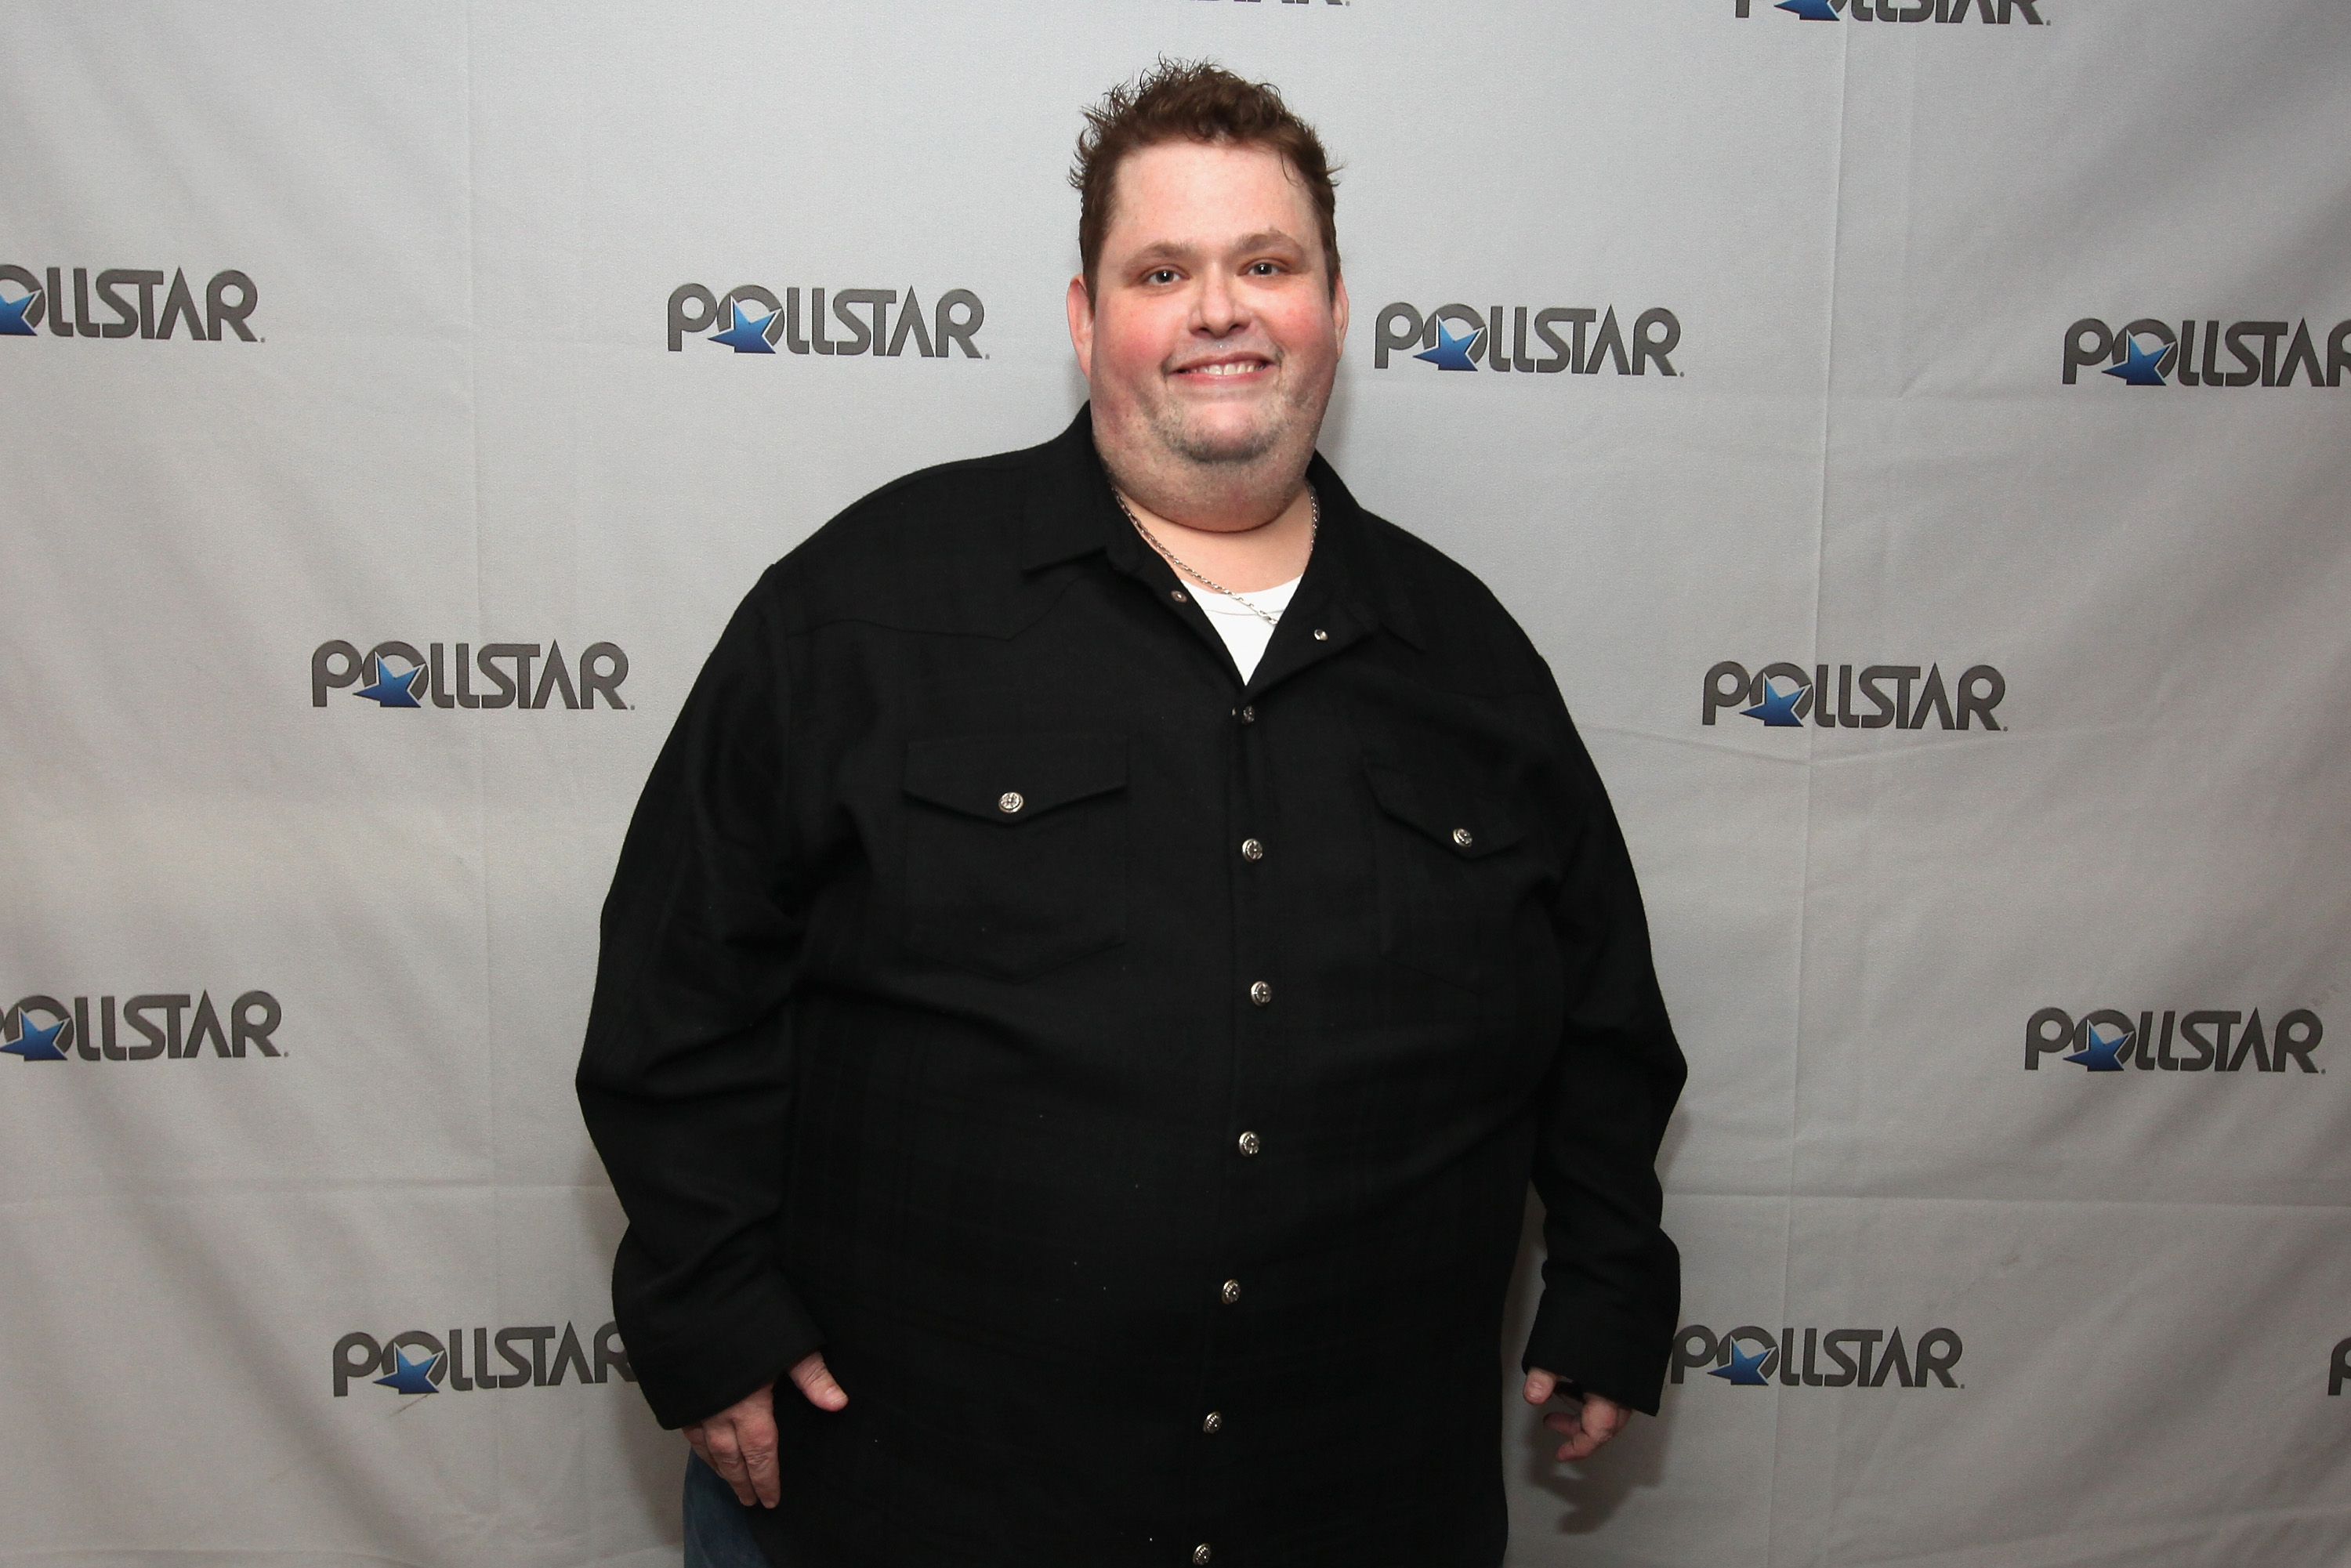 Host Ralphie May poses backstage during the 26th Annual PollStar Awards at Ryman Auditorium on February 21, 2015 in Nashville, Tennessee. (Barry Brecheisen&mdash;Getty Images)